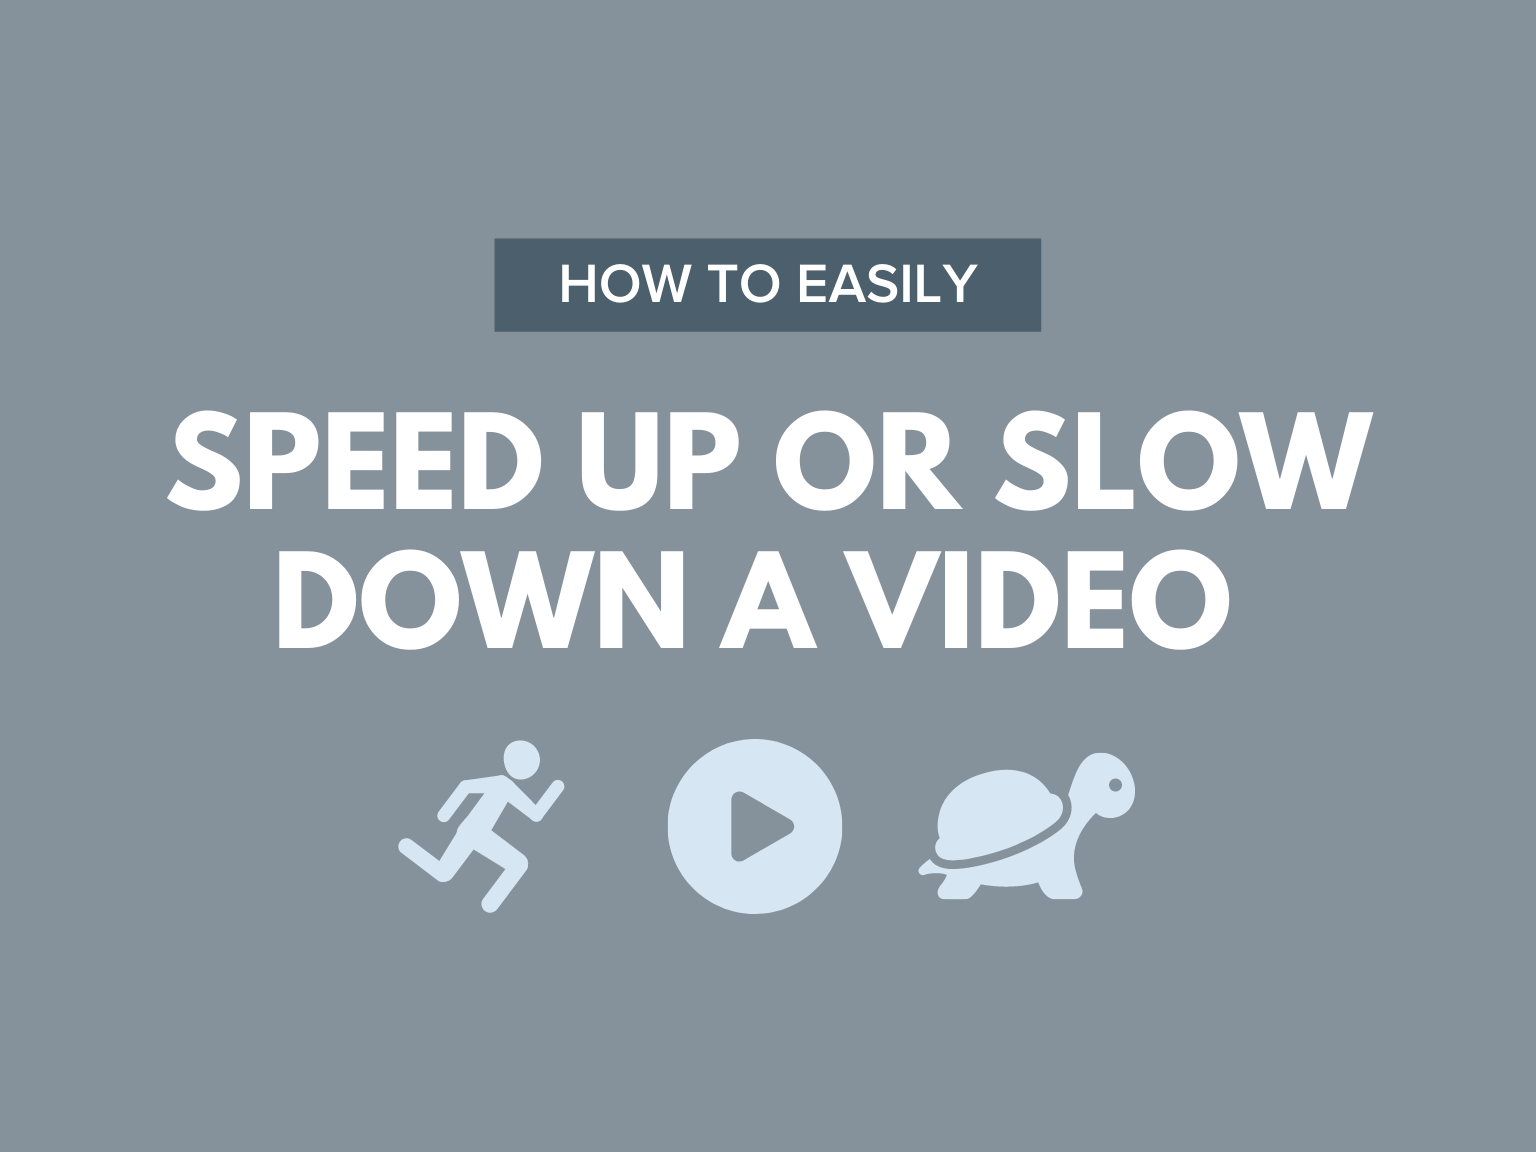 Speed Up or Slow Down Videos Easily